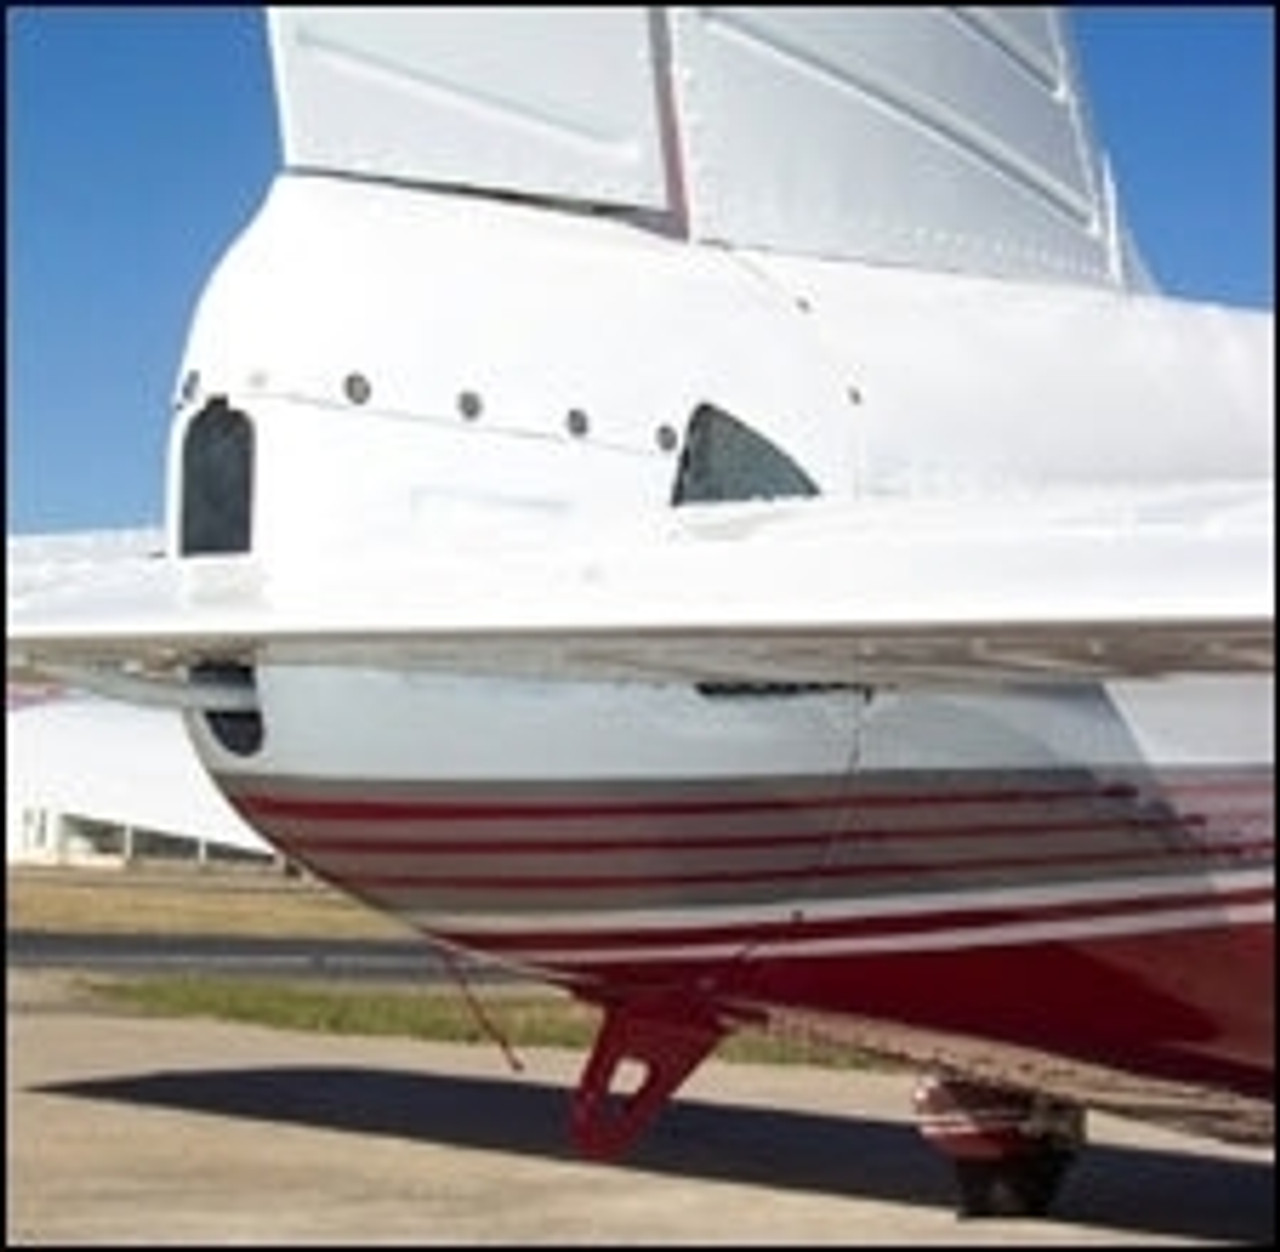 Installed Piper upper tailcone. OEM P/N 66822-08